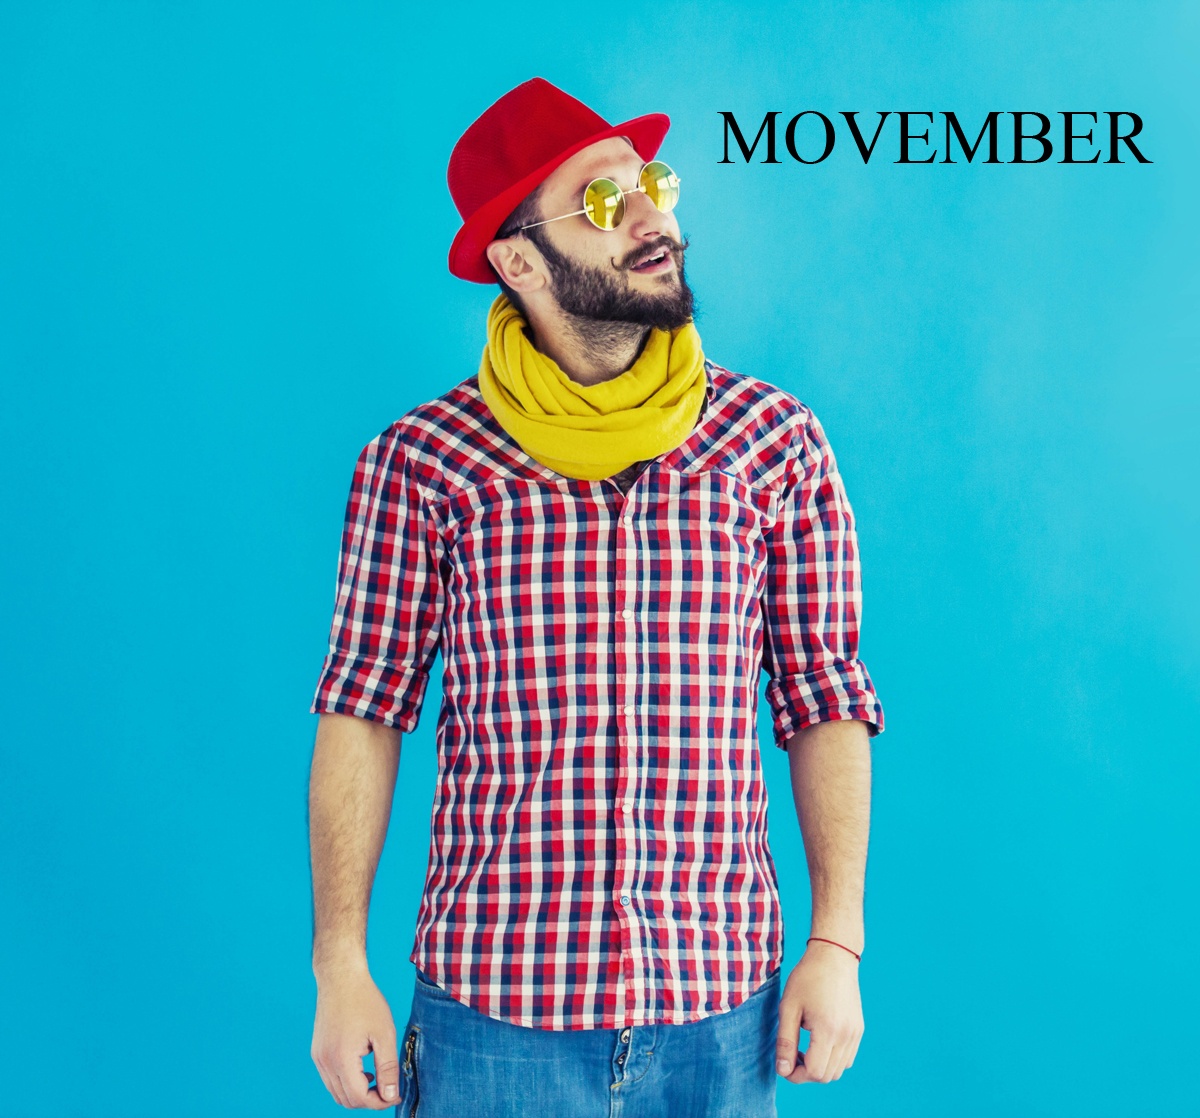 Movember aims to address men's health issues - This day encourages a greater understanding of men's health issues, such as prostate cancer, testicular cancer and men's suicide. #Movember